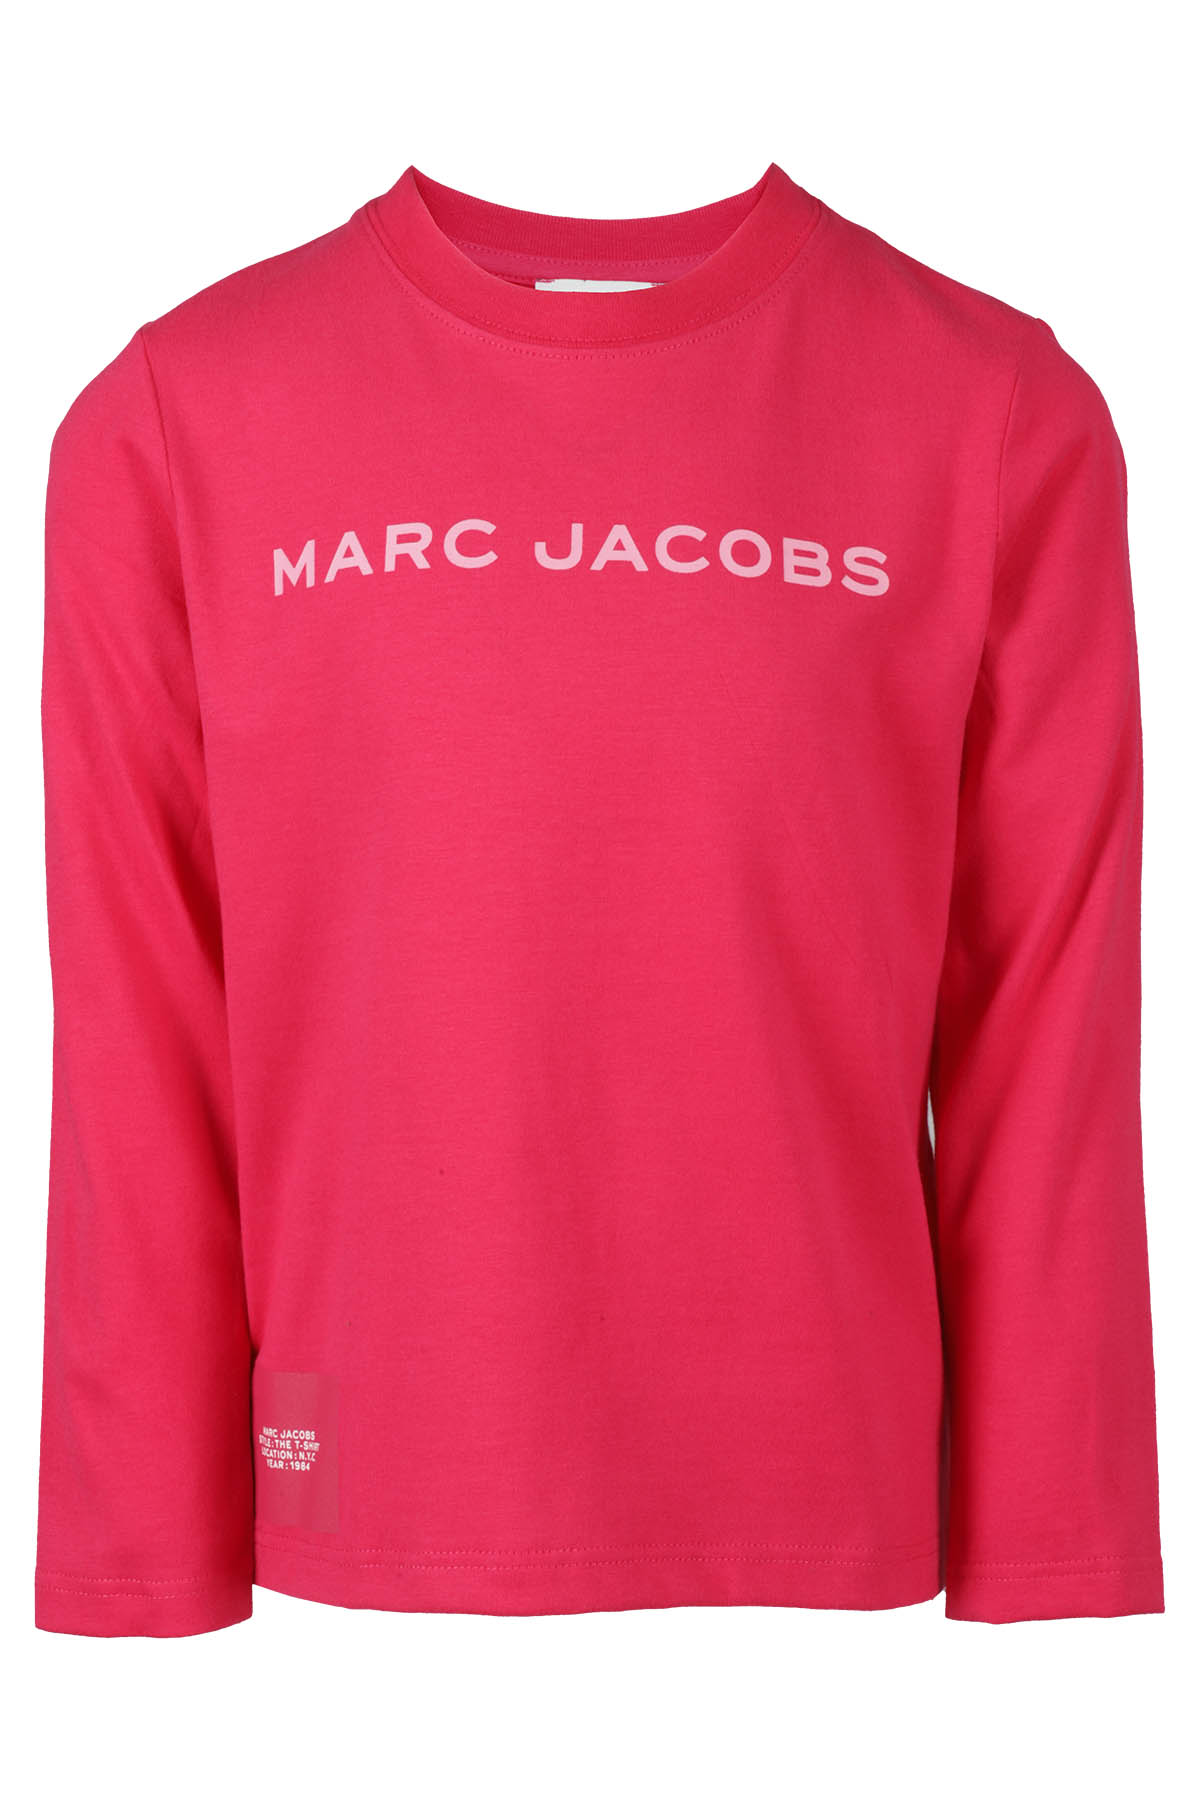 Little Marc Jacobs Kids' Tee Shirt M/l In Fucsia